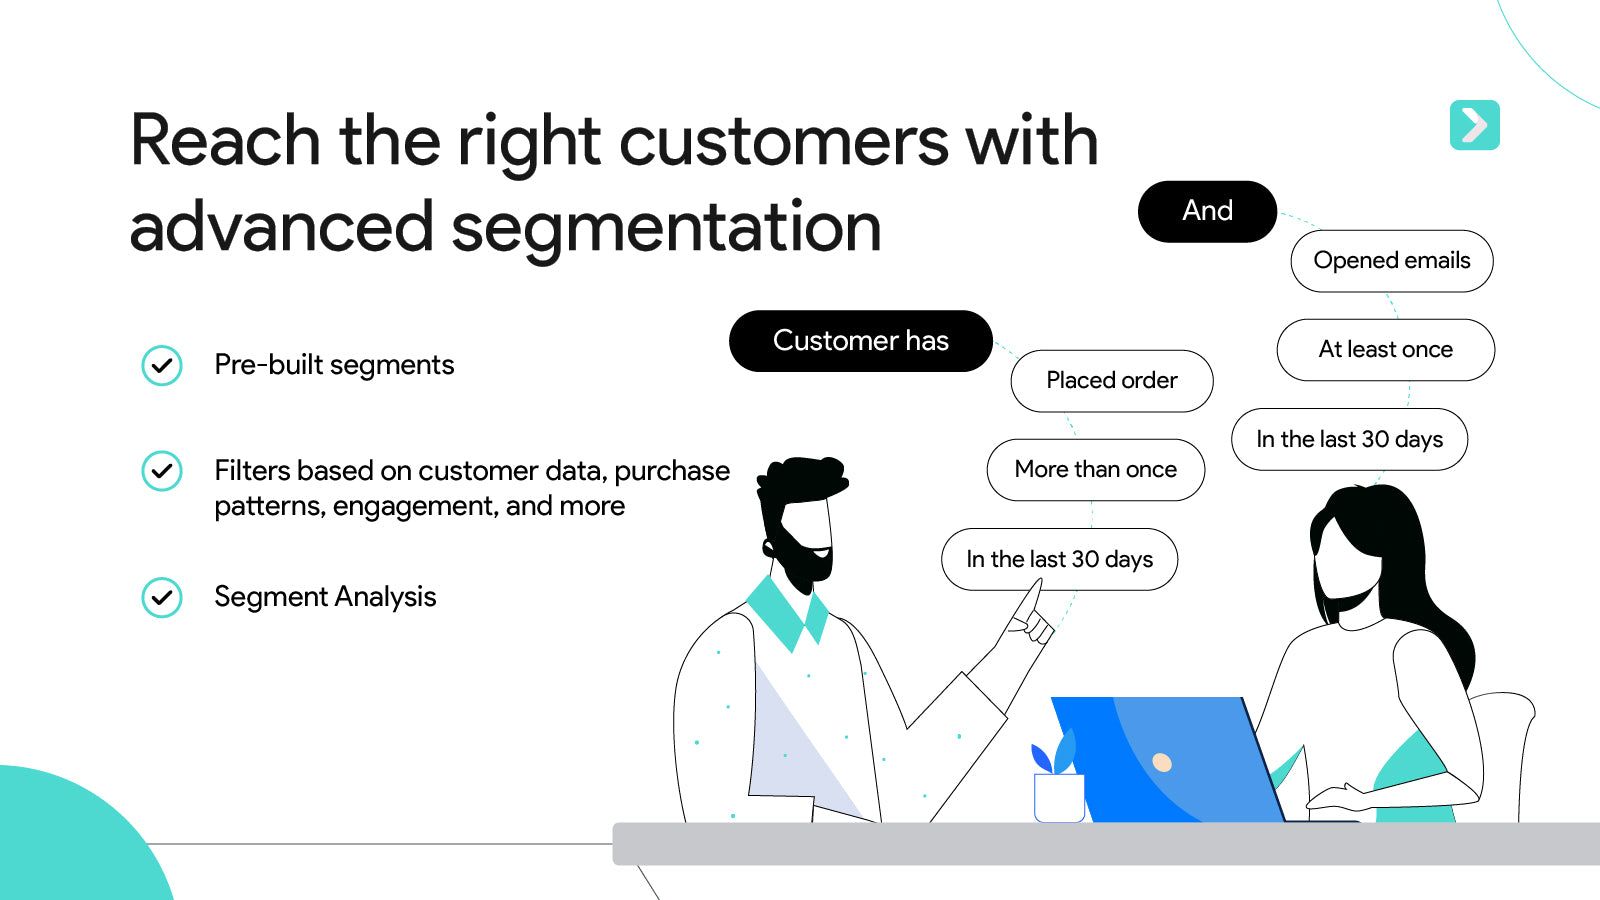 Send meaningful, relevant messages with advanced segmentation